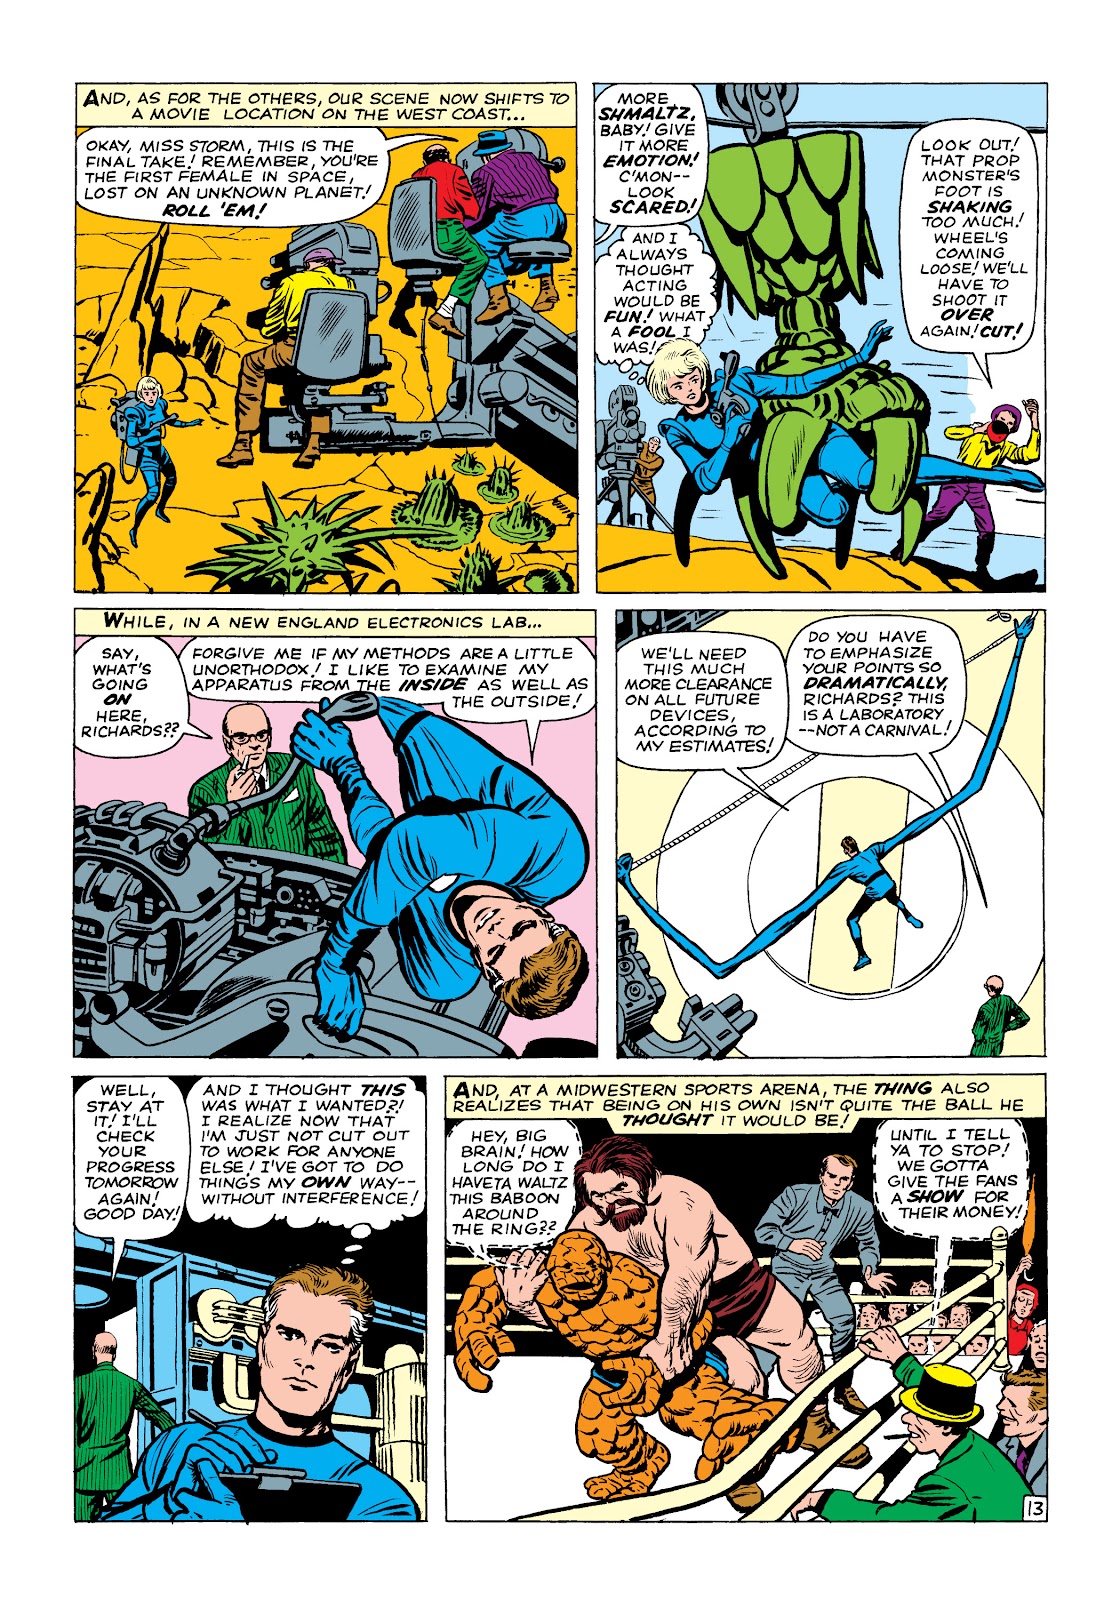 Read online Marvel Masterworks: The Fantastic Four comic - Issue # TPB 2 (Part 2) - 13